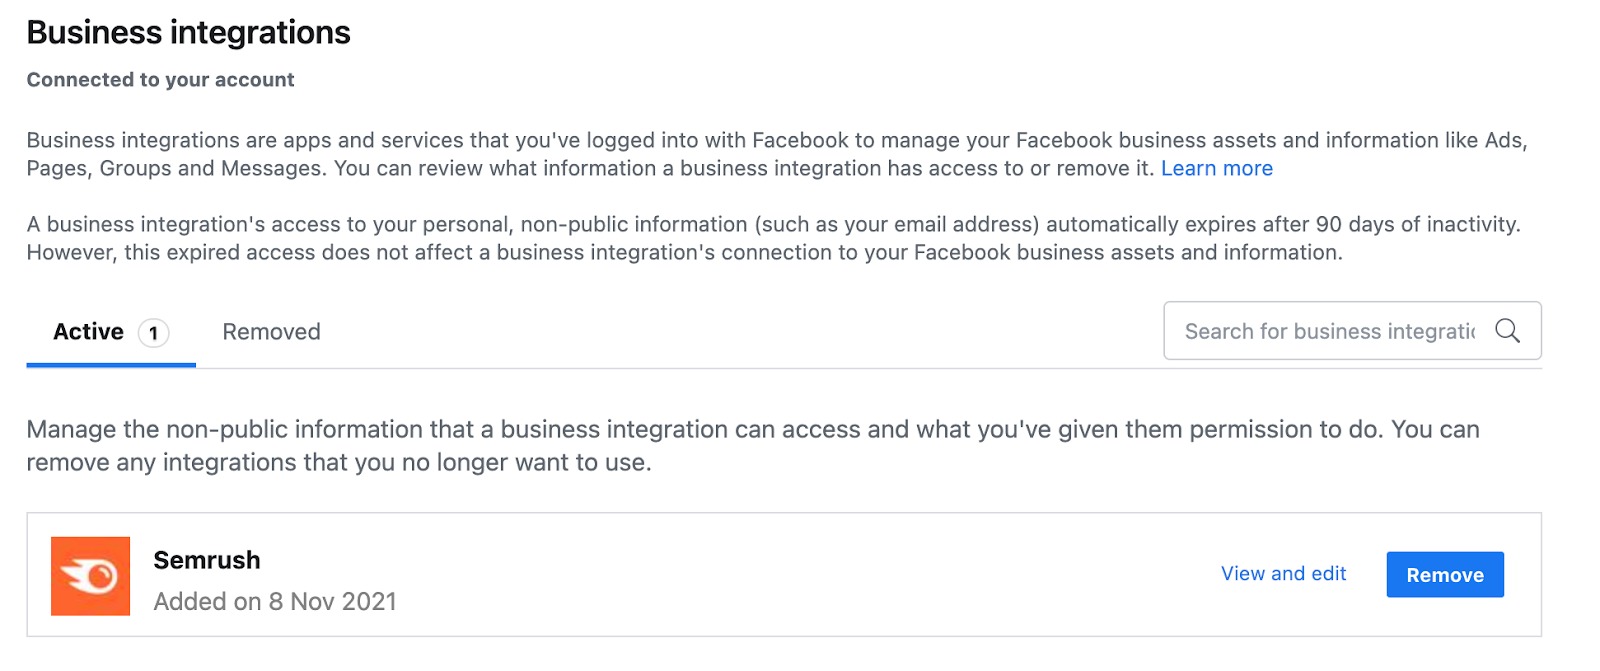 Facebook Business Integrations menu with Semrush added as an active integration. 